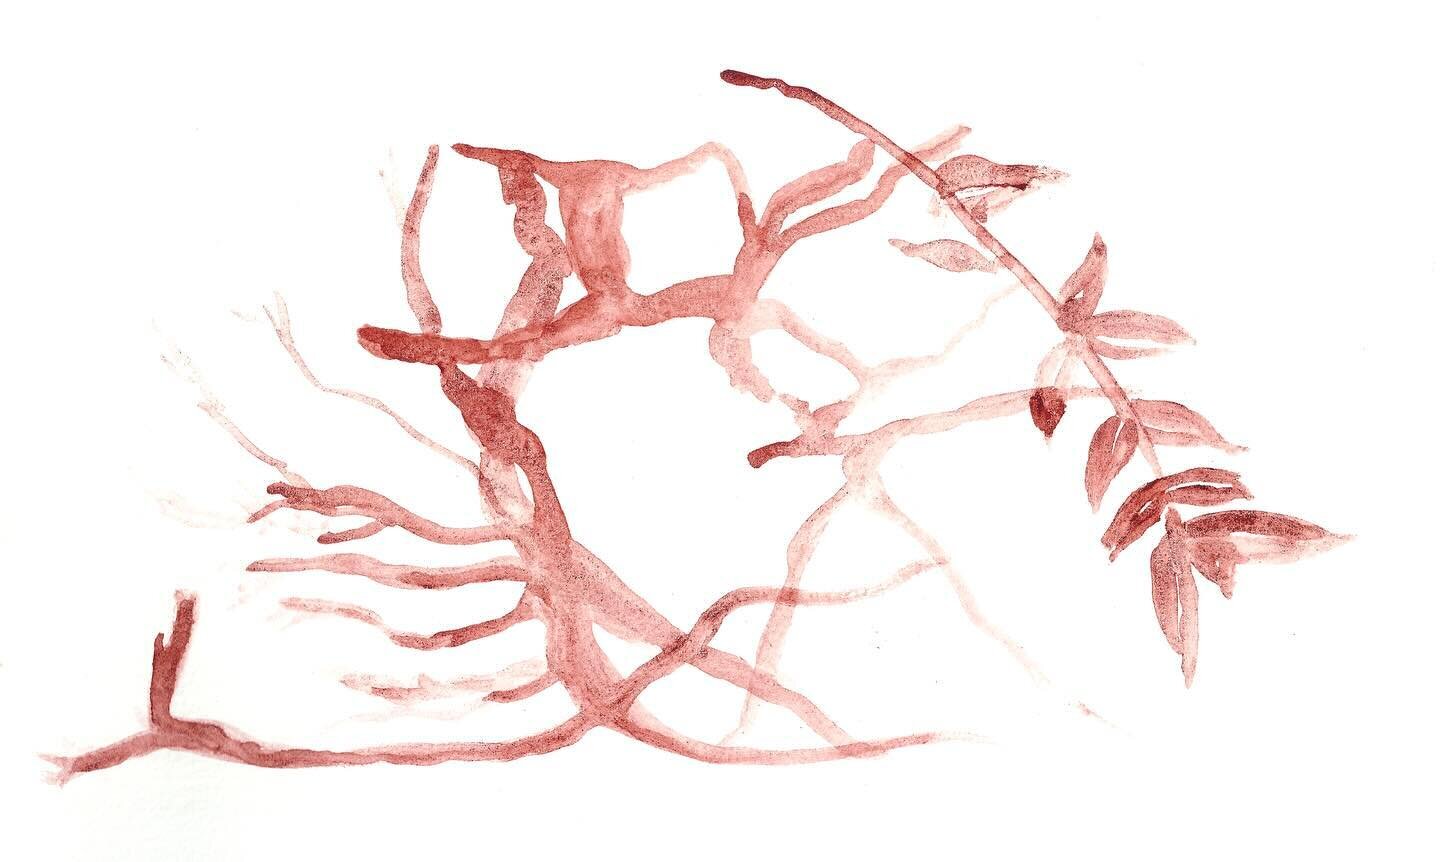 madder painted with my handmade madder root watercolors. this color was, in a sense, grown from seed &amp; is now three years old in my garden ❣️

madder is so cool. skeletons of animals who eat the plant are red from its super strong dye properties.